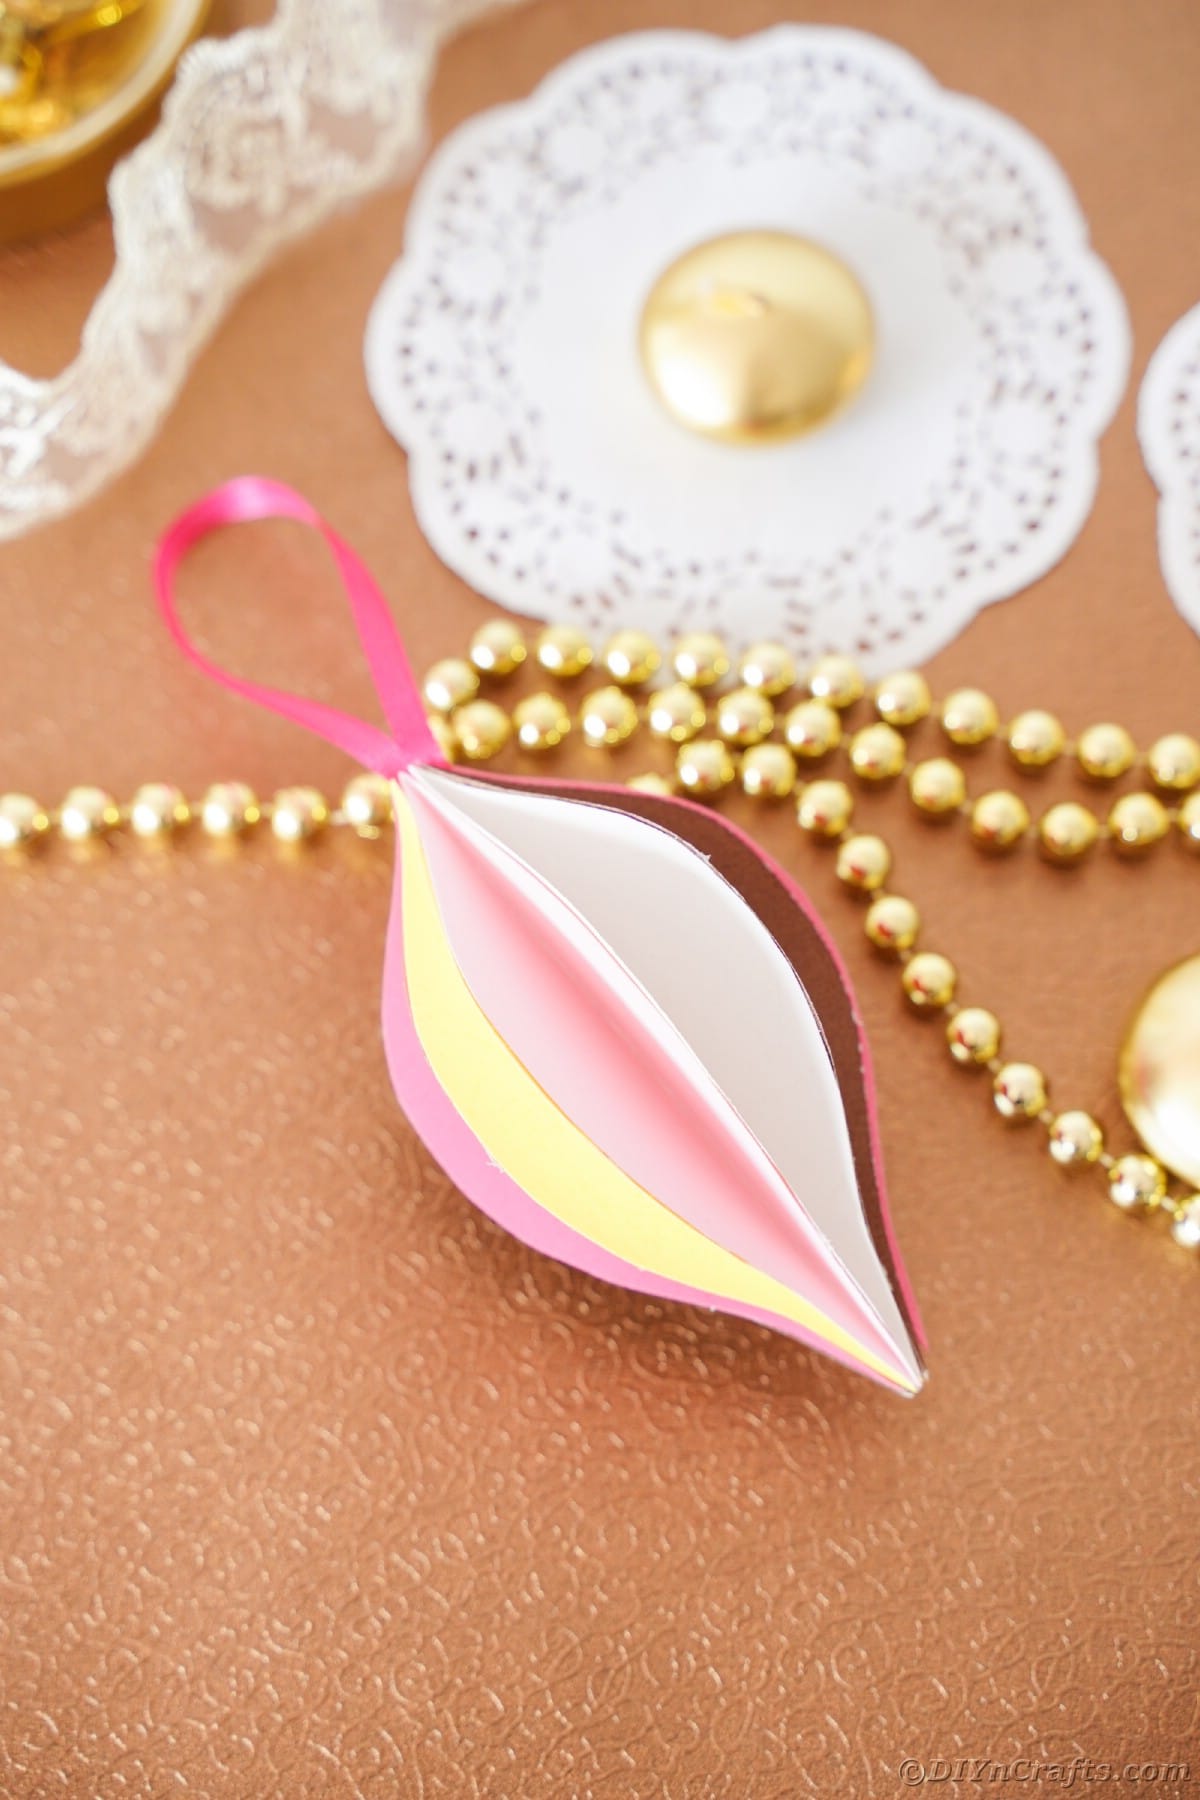 pink and yellow paper ornament on brown table